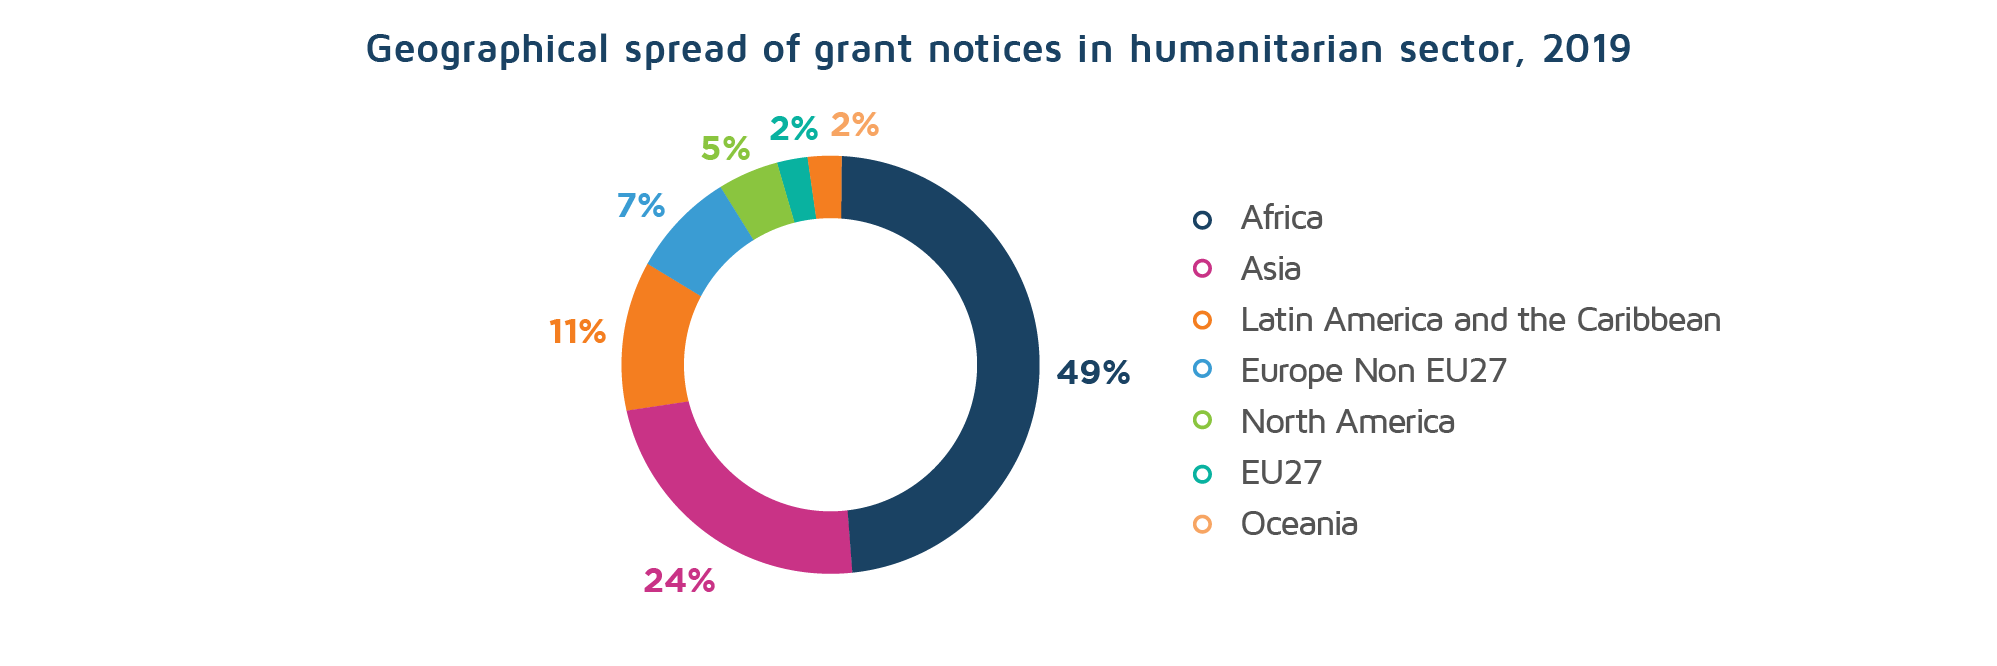 Geography of the grant notices in humanitarian sector, 2019